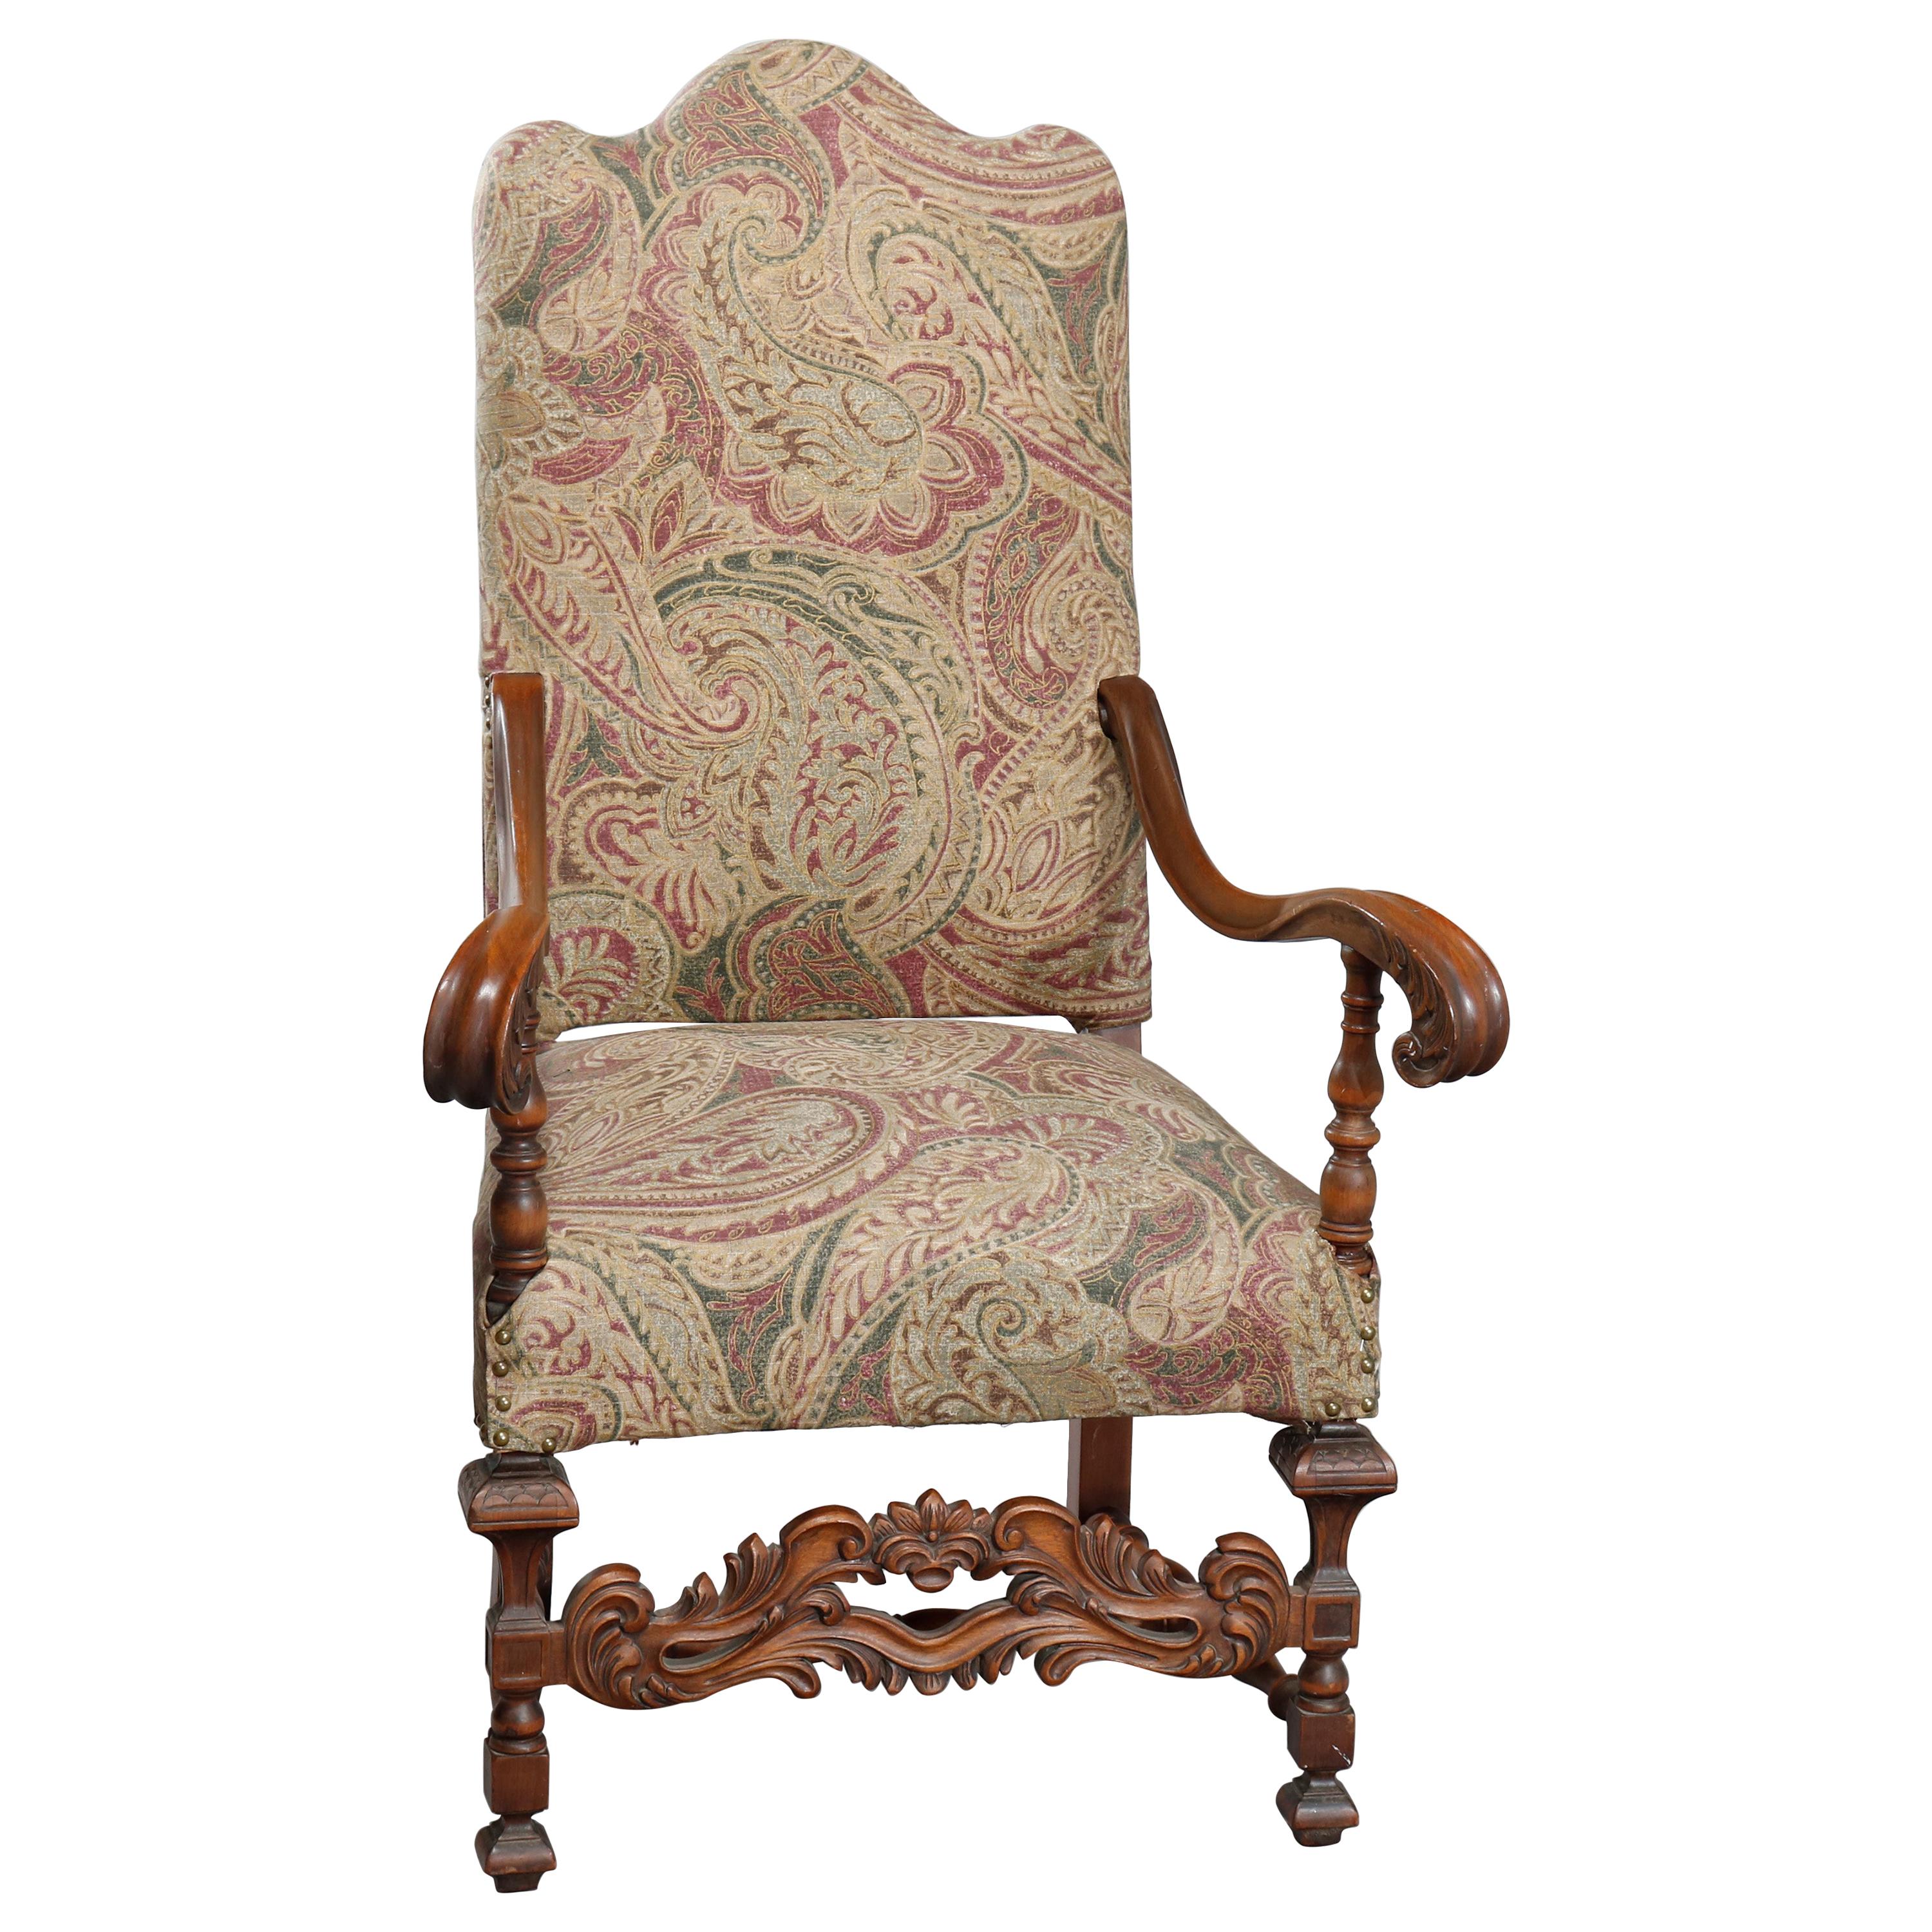 Antique Italian Renaissance Revival Style Carved Walnut Throne Chair, circa 1900 For Sale